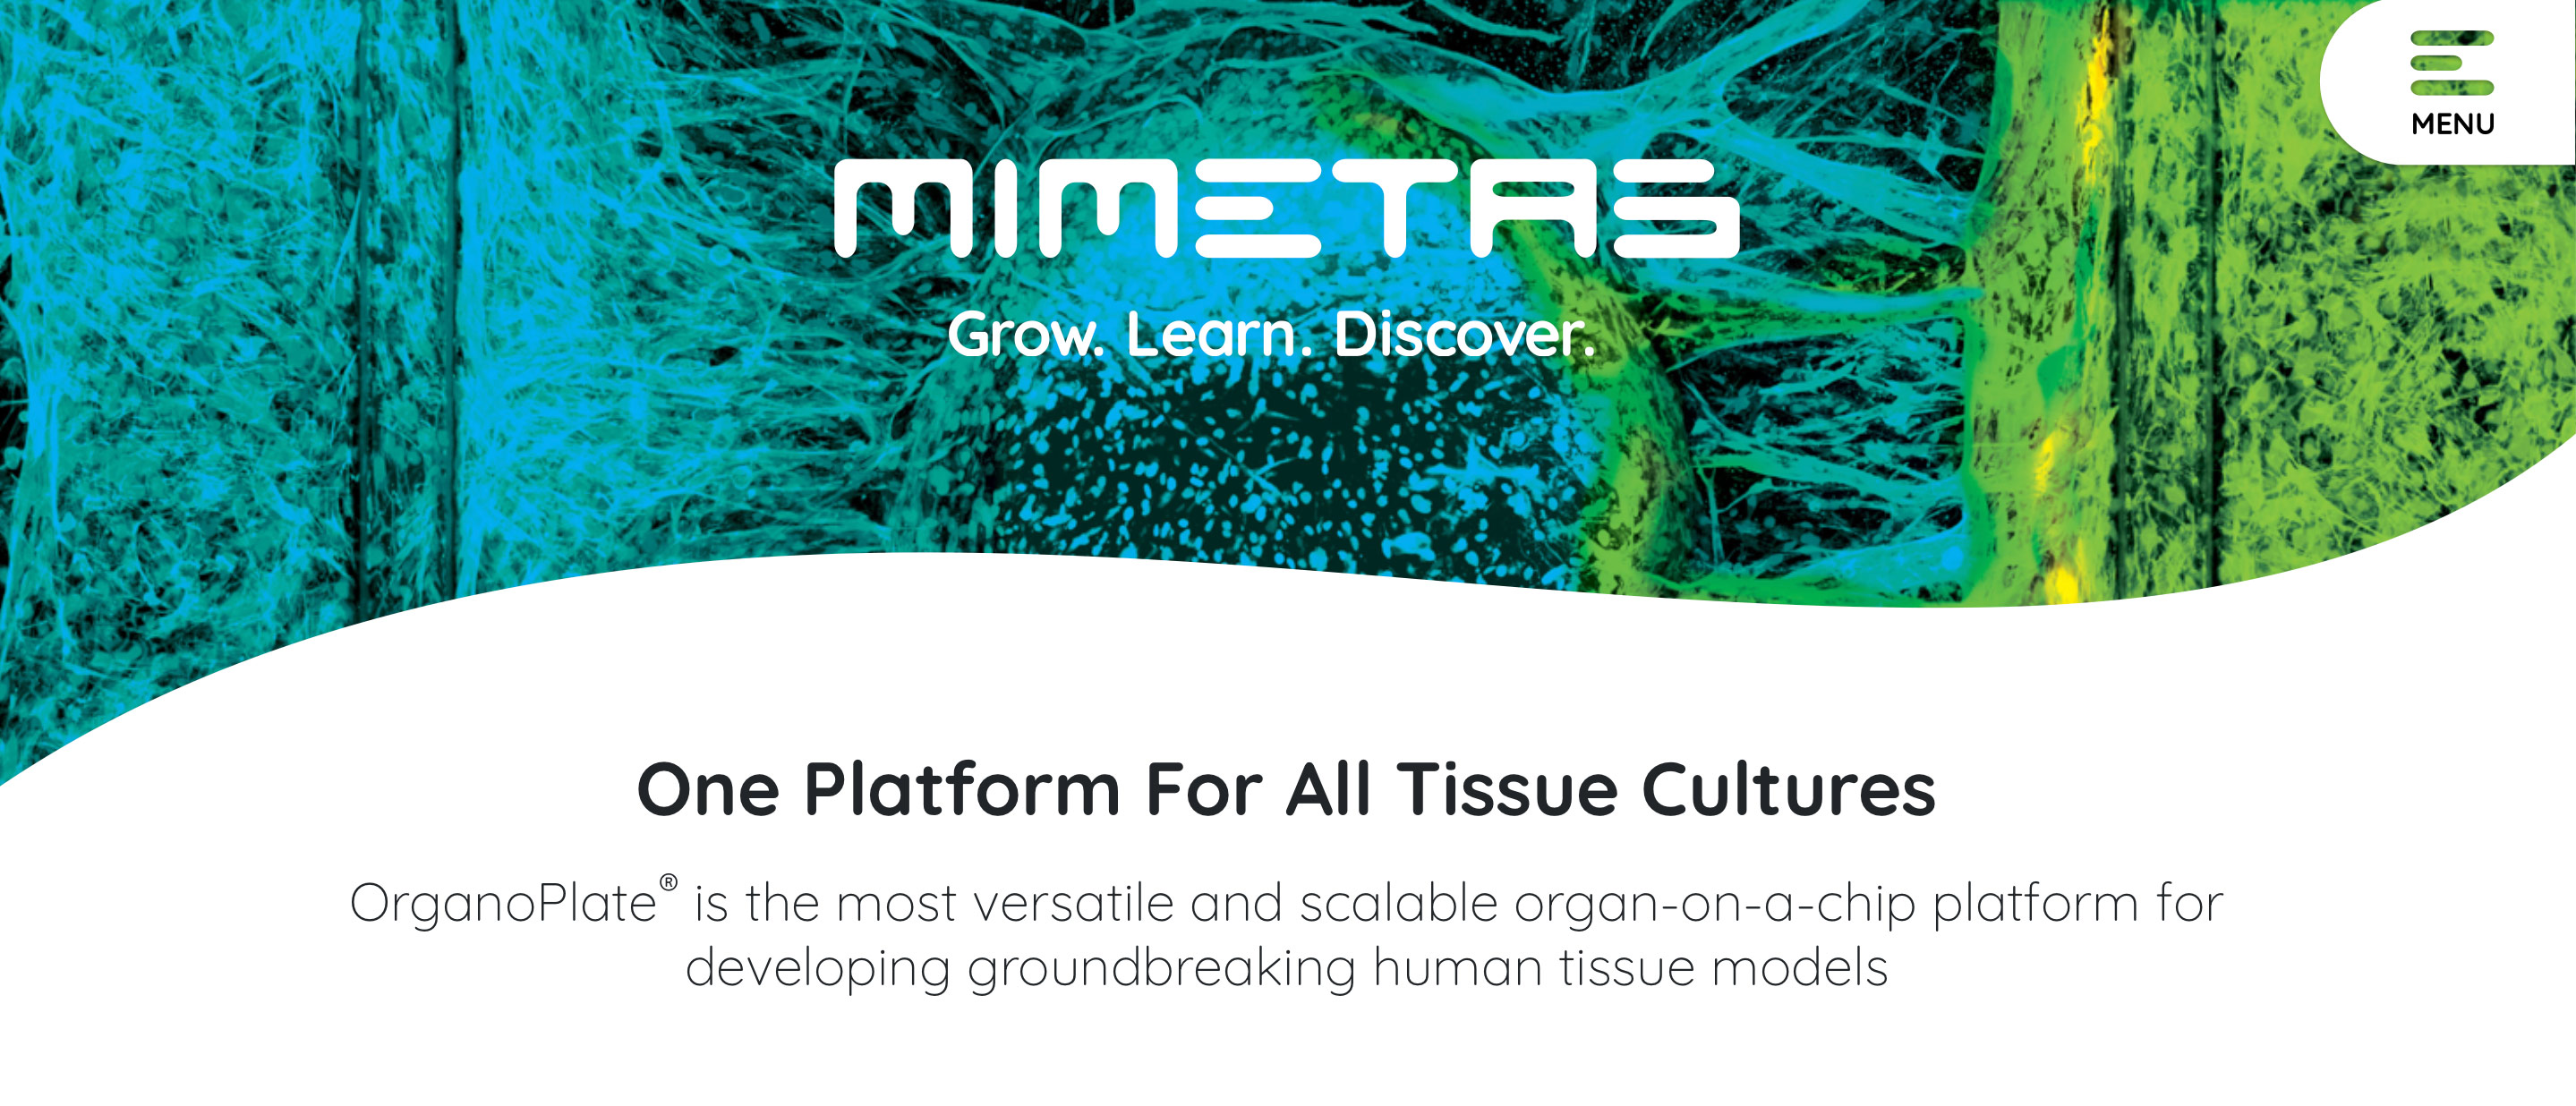 Mimetas is a privately owned biotechnology company developing human organ-on-a-chip tissue models and products for drug development. 